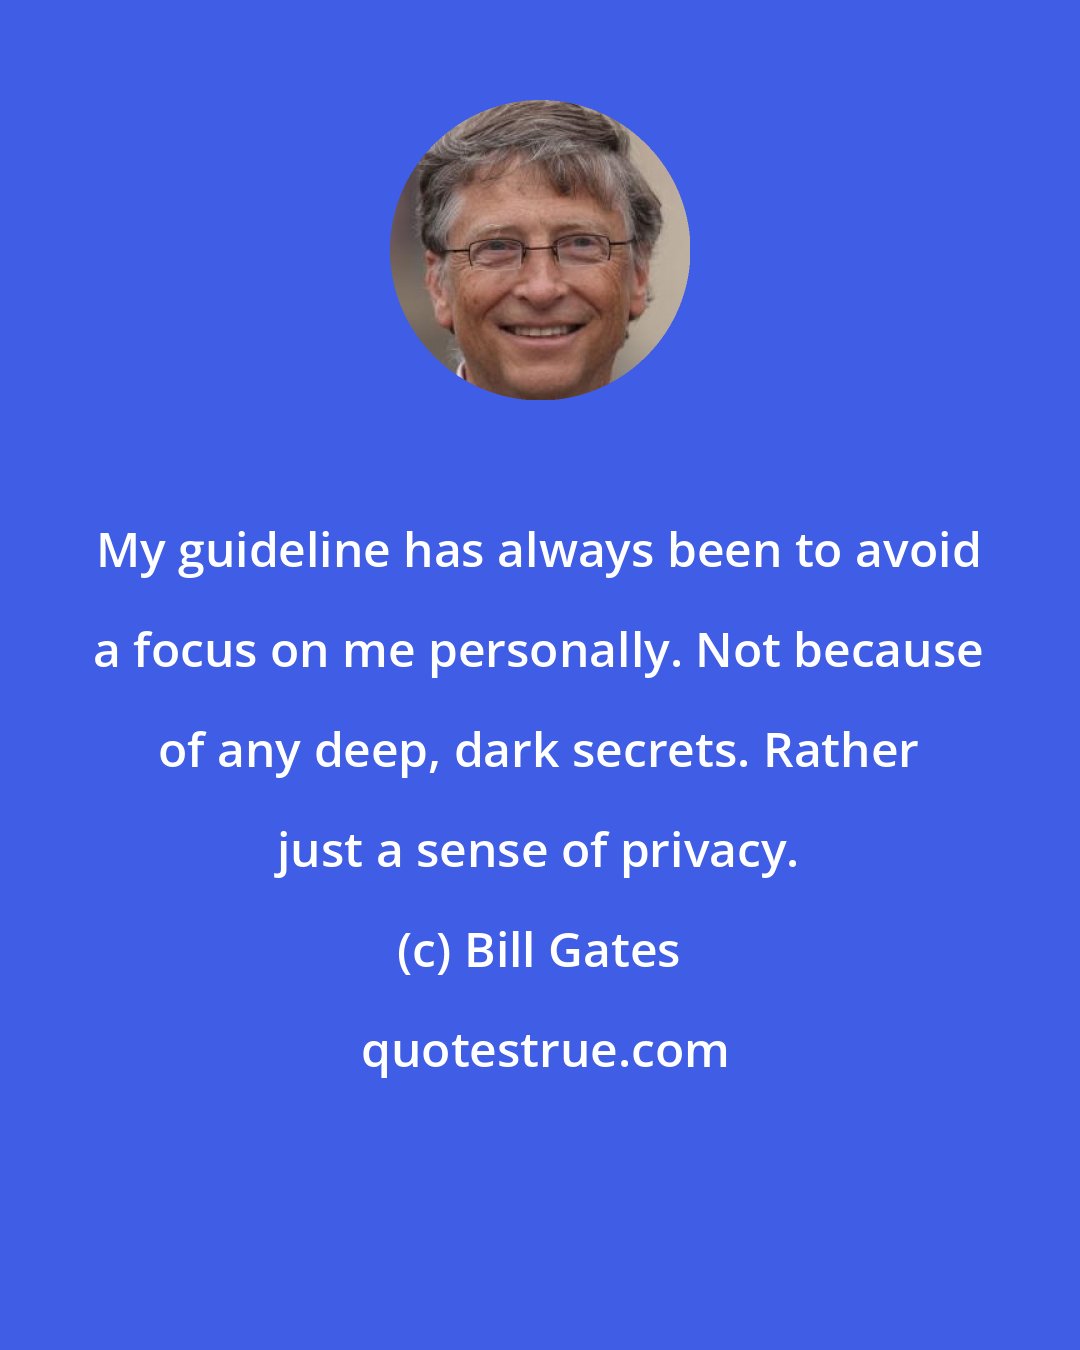 Bill Gates: My guideline has always been to avoid a focus on me personally. Not because of any deep, dark secrets. Rather just a sense of privacy.